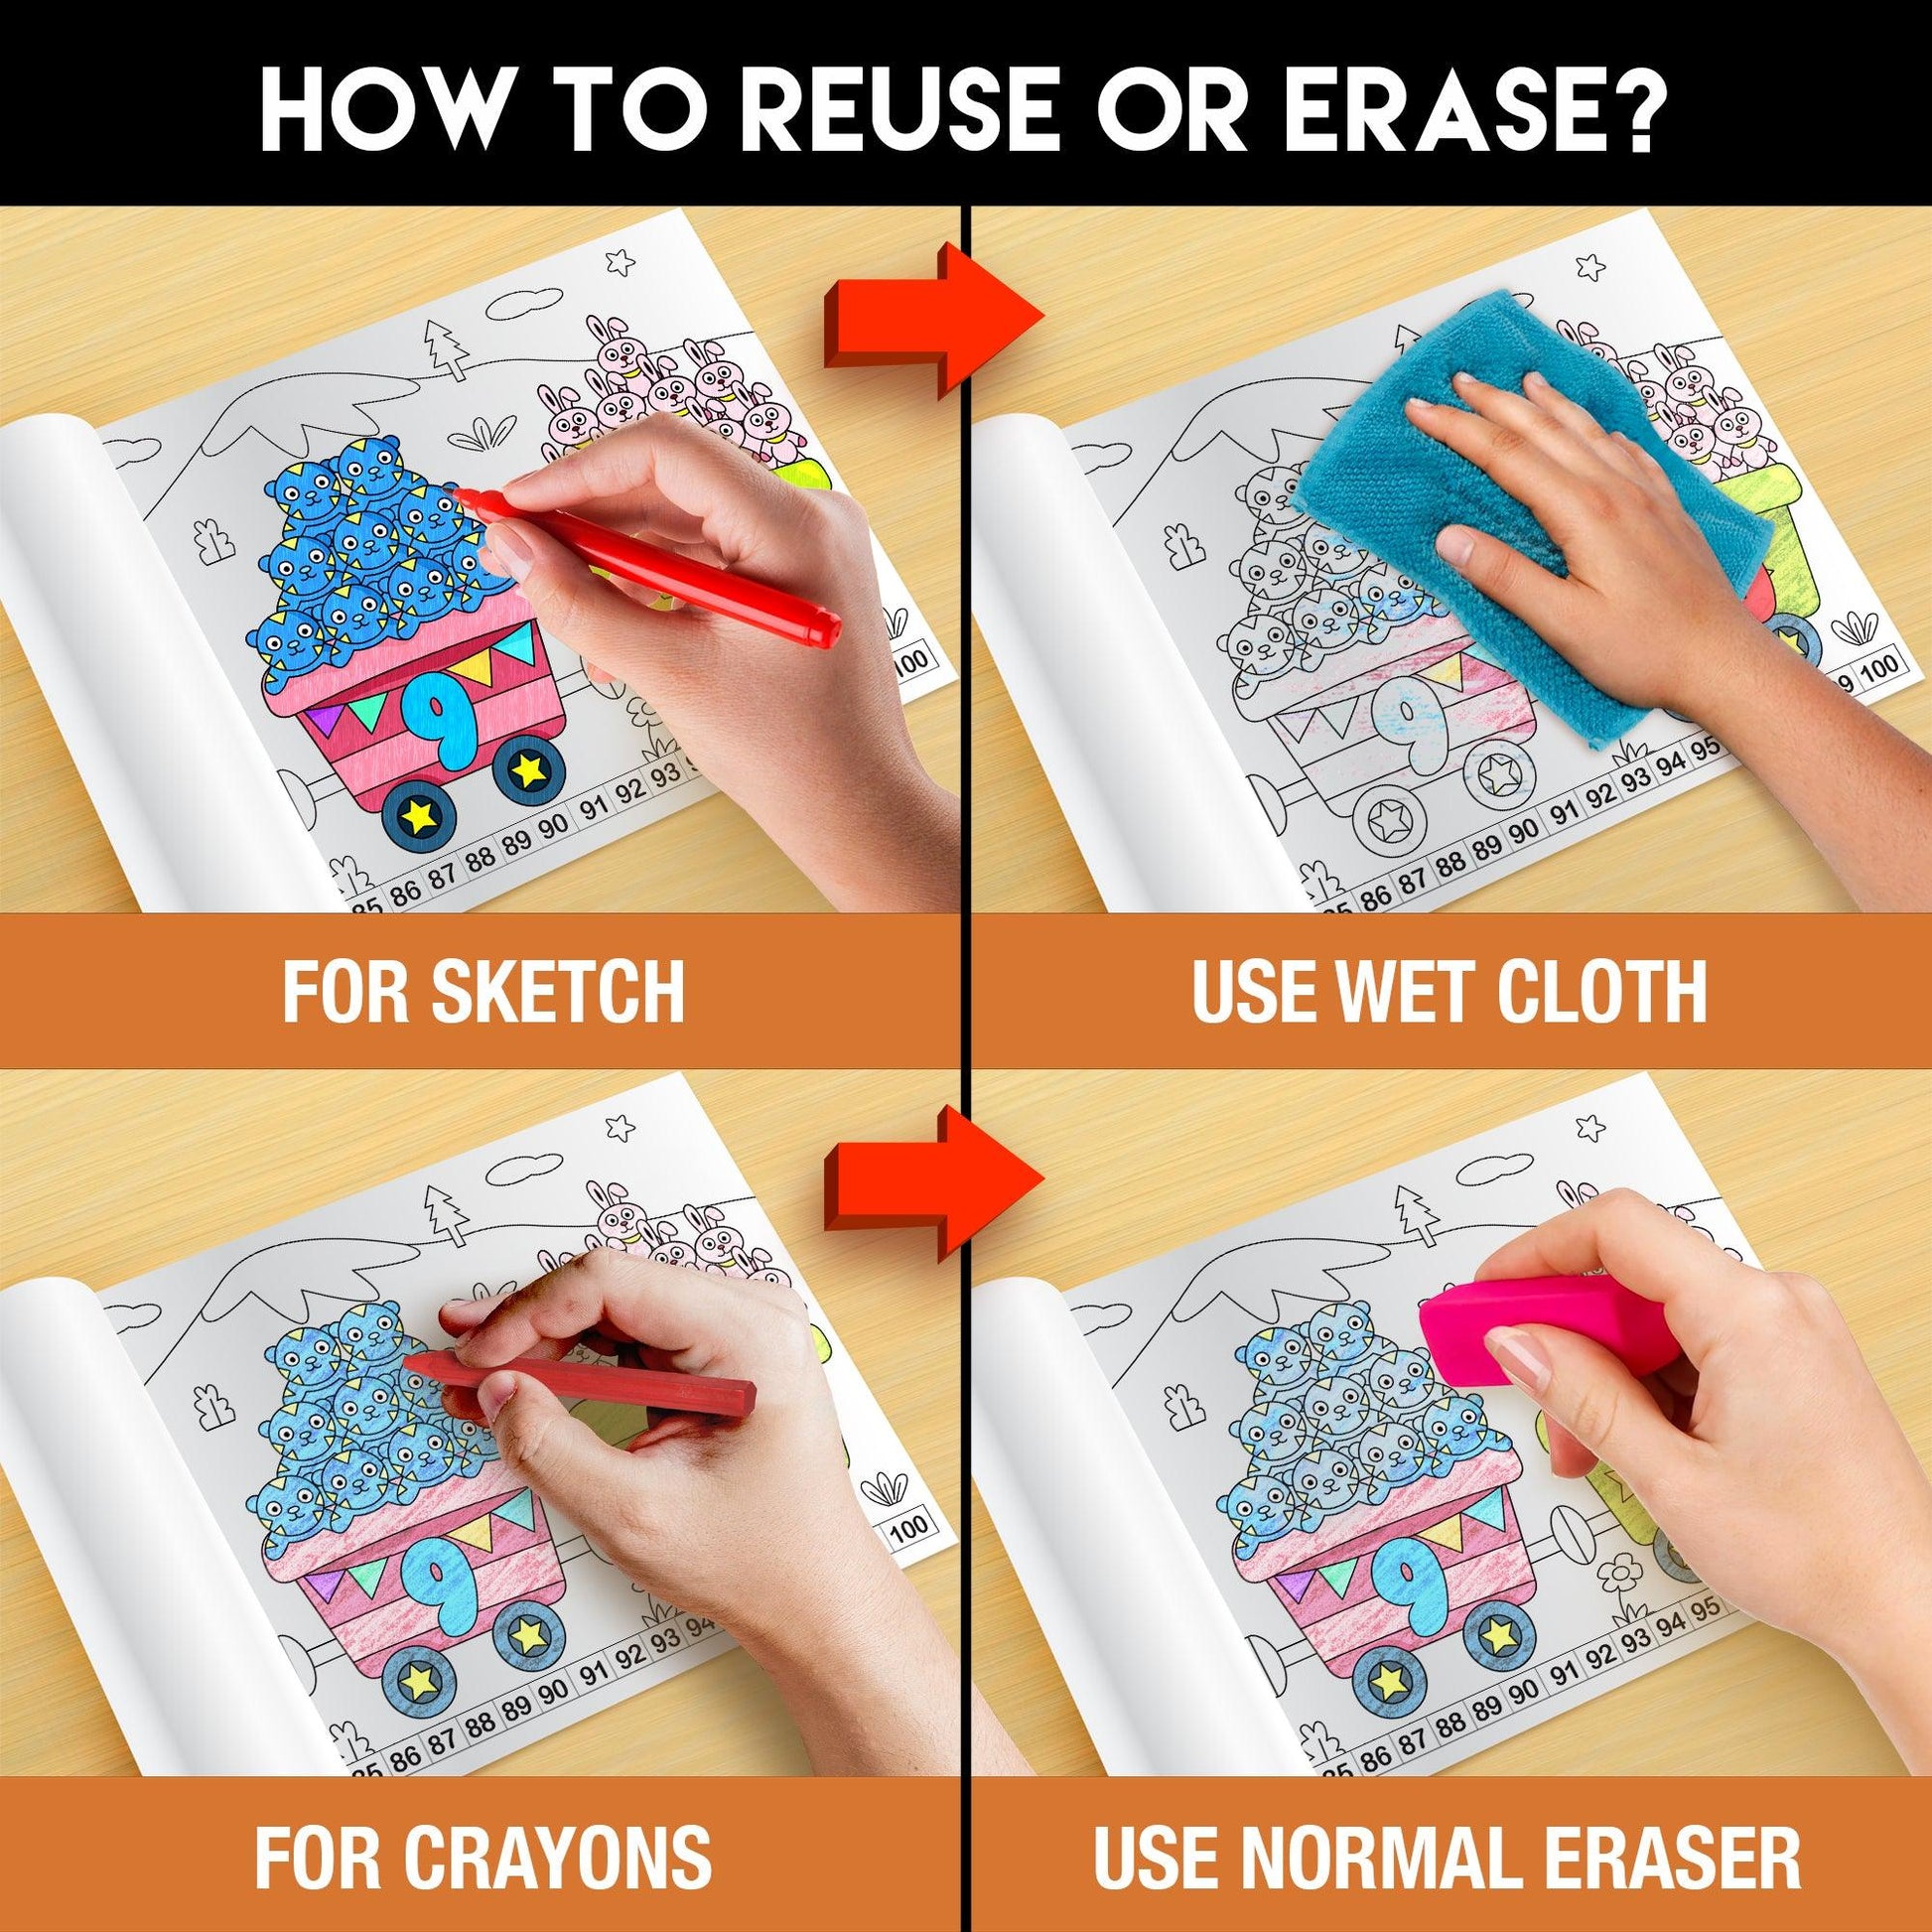 The image has an orange background with four pictures demonstrating how to reuse or erase: the first picture depicts sketching on the numbers sheet, the second shows using a wet cloth to remove sketches, the third image displays crayons coloring on the numbers sheet, and the fourth image illustrates erasing crayons with a regular eraser.